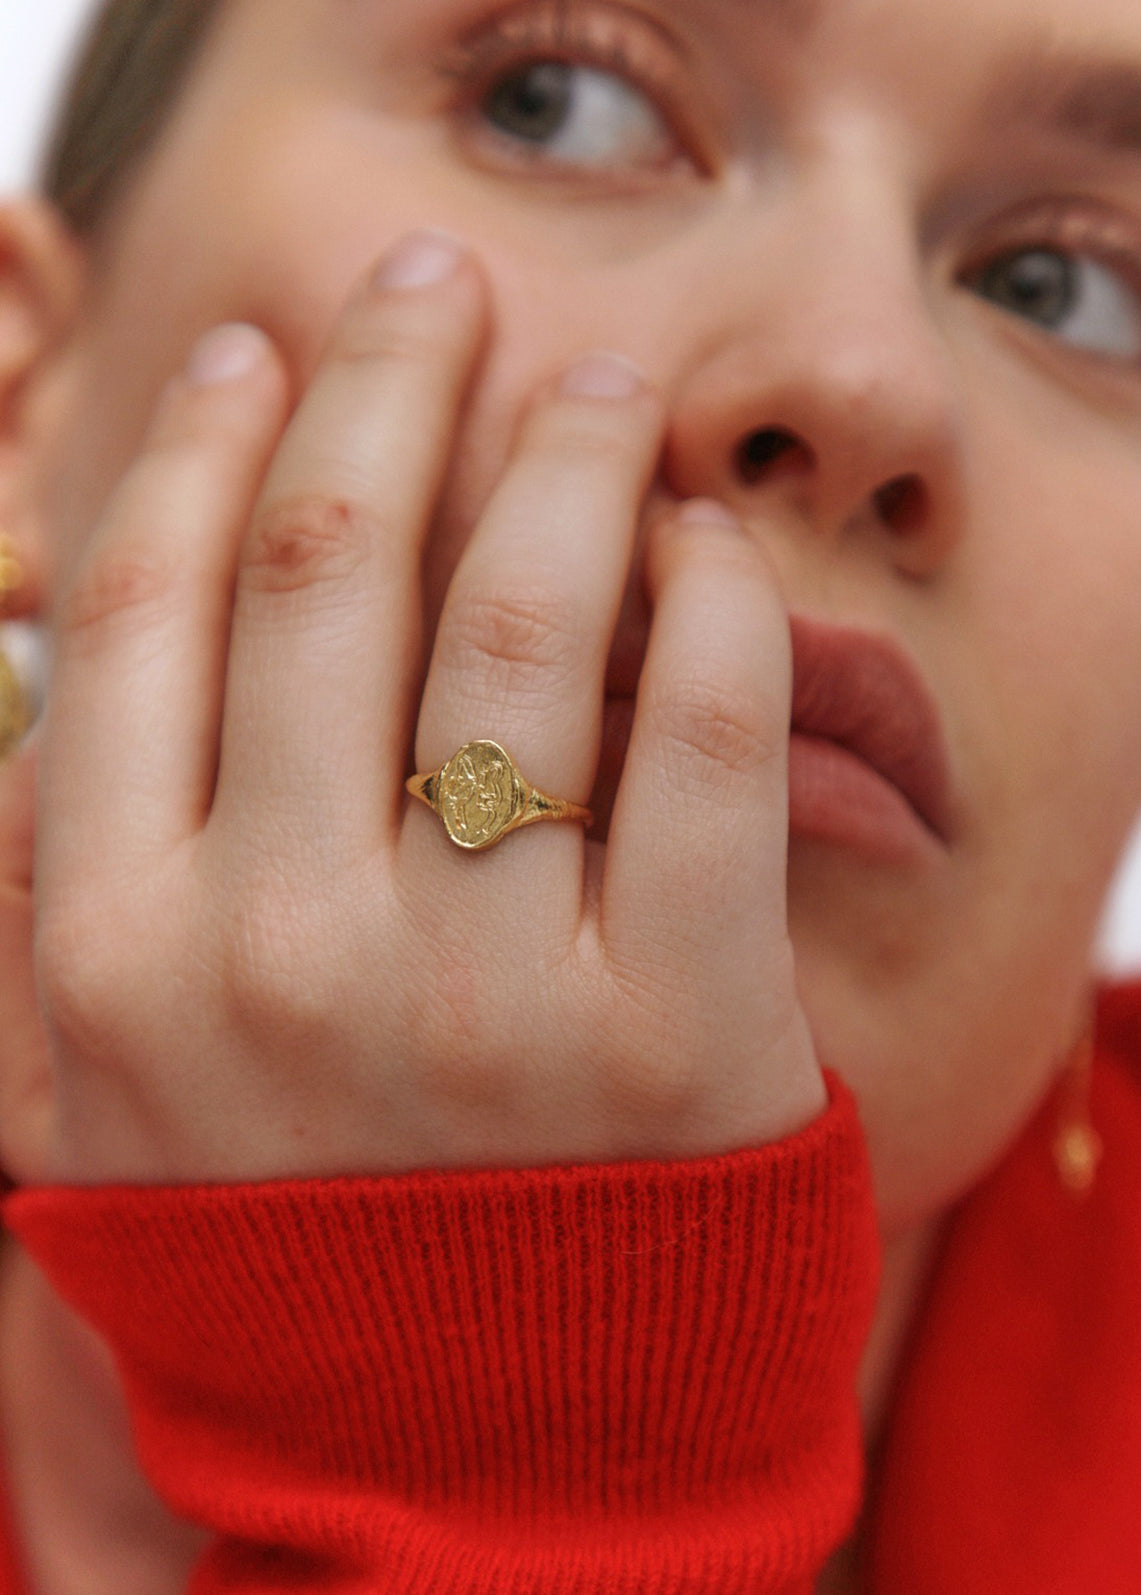 A woman wearing a gold signet ring with etching of a bow.